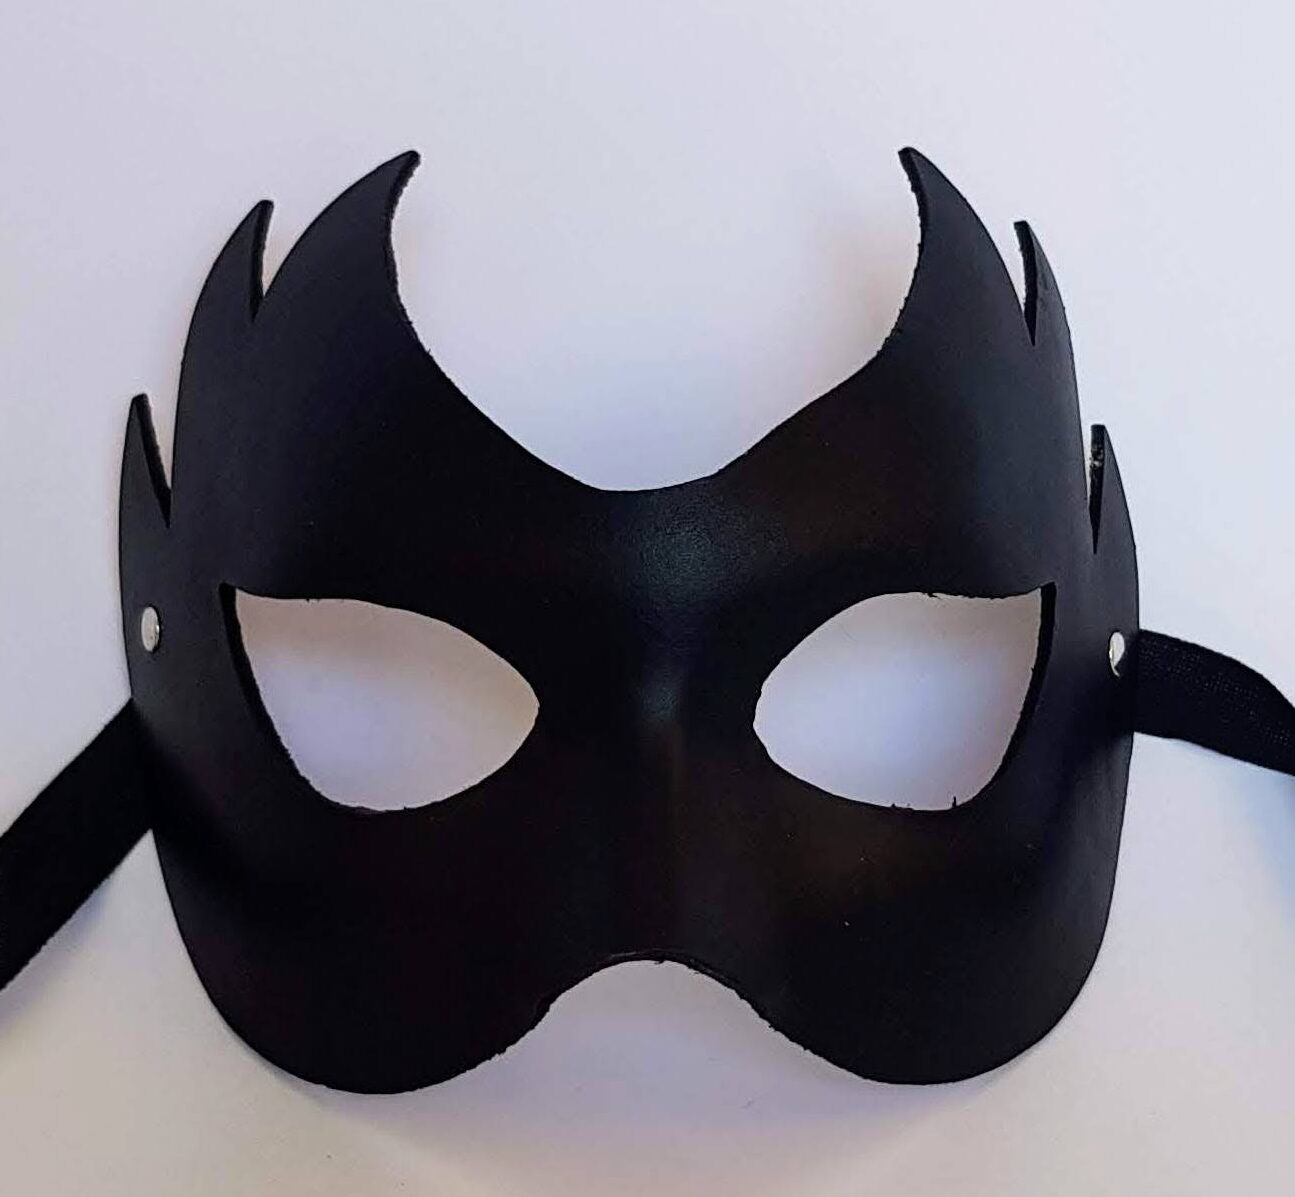 The seeker leather mask